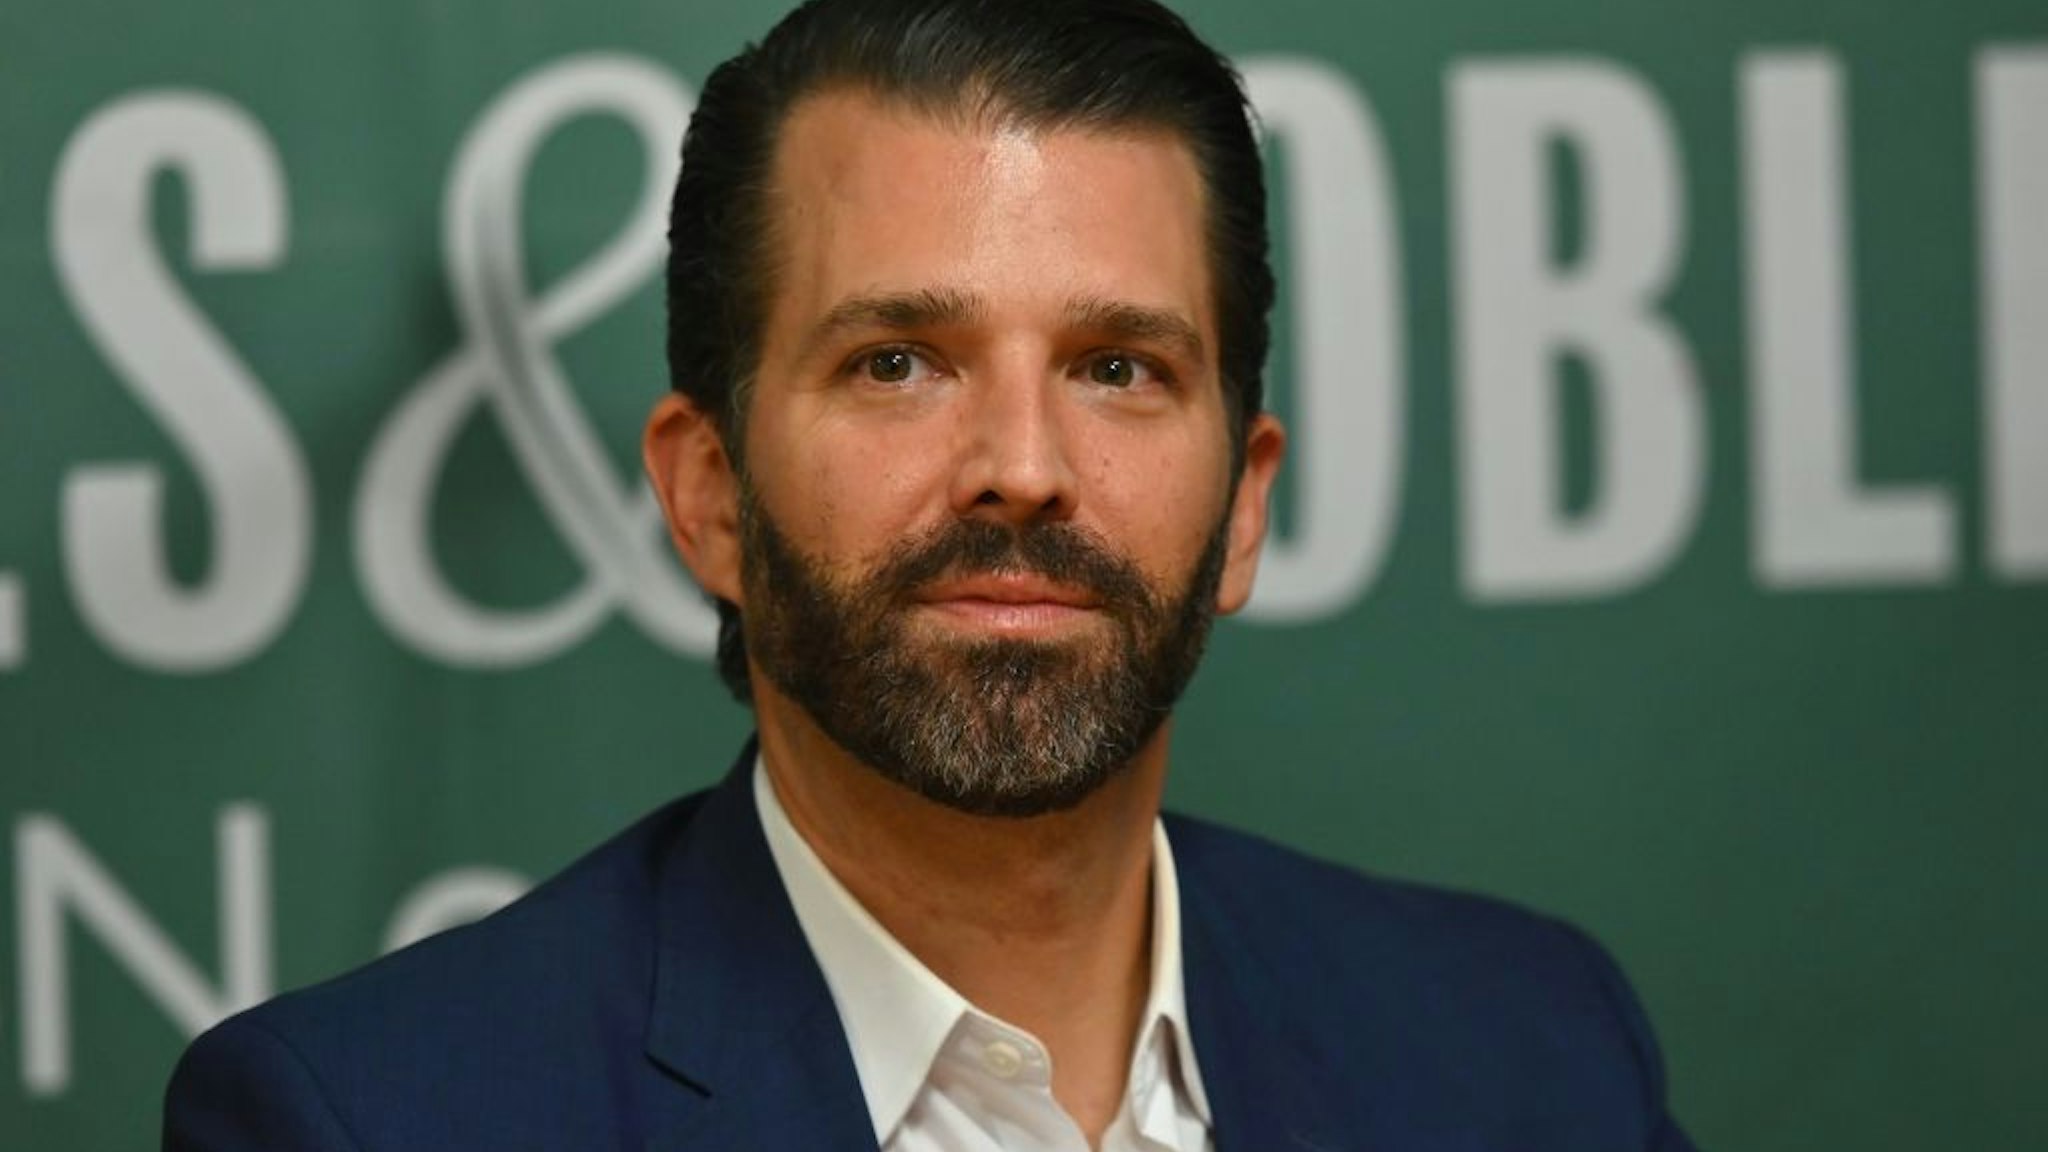 Donald Trump Jr., poses during a signing event for his new Book "Triggered: How the Left Thrives on Hate and Wants to Silence Us" at Barnes & Noble on 5th Avenue on November 5, 2019 in New York.